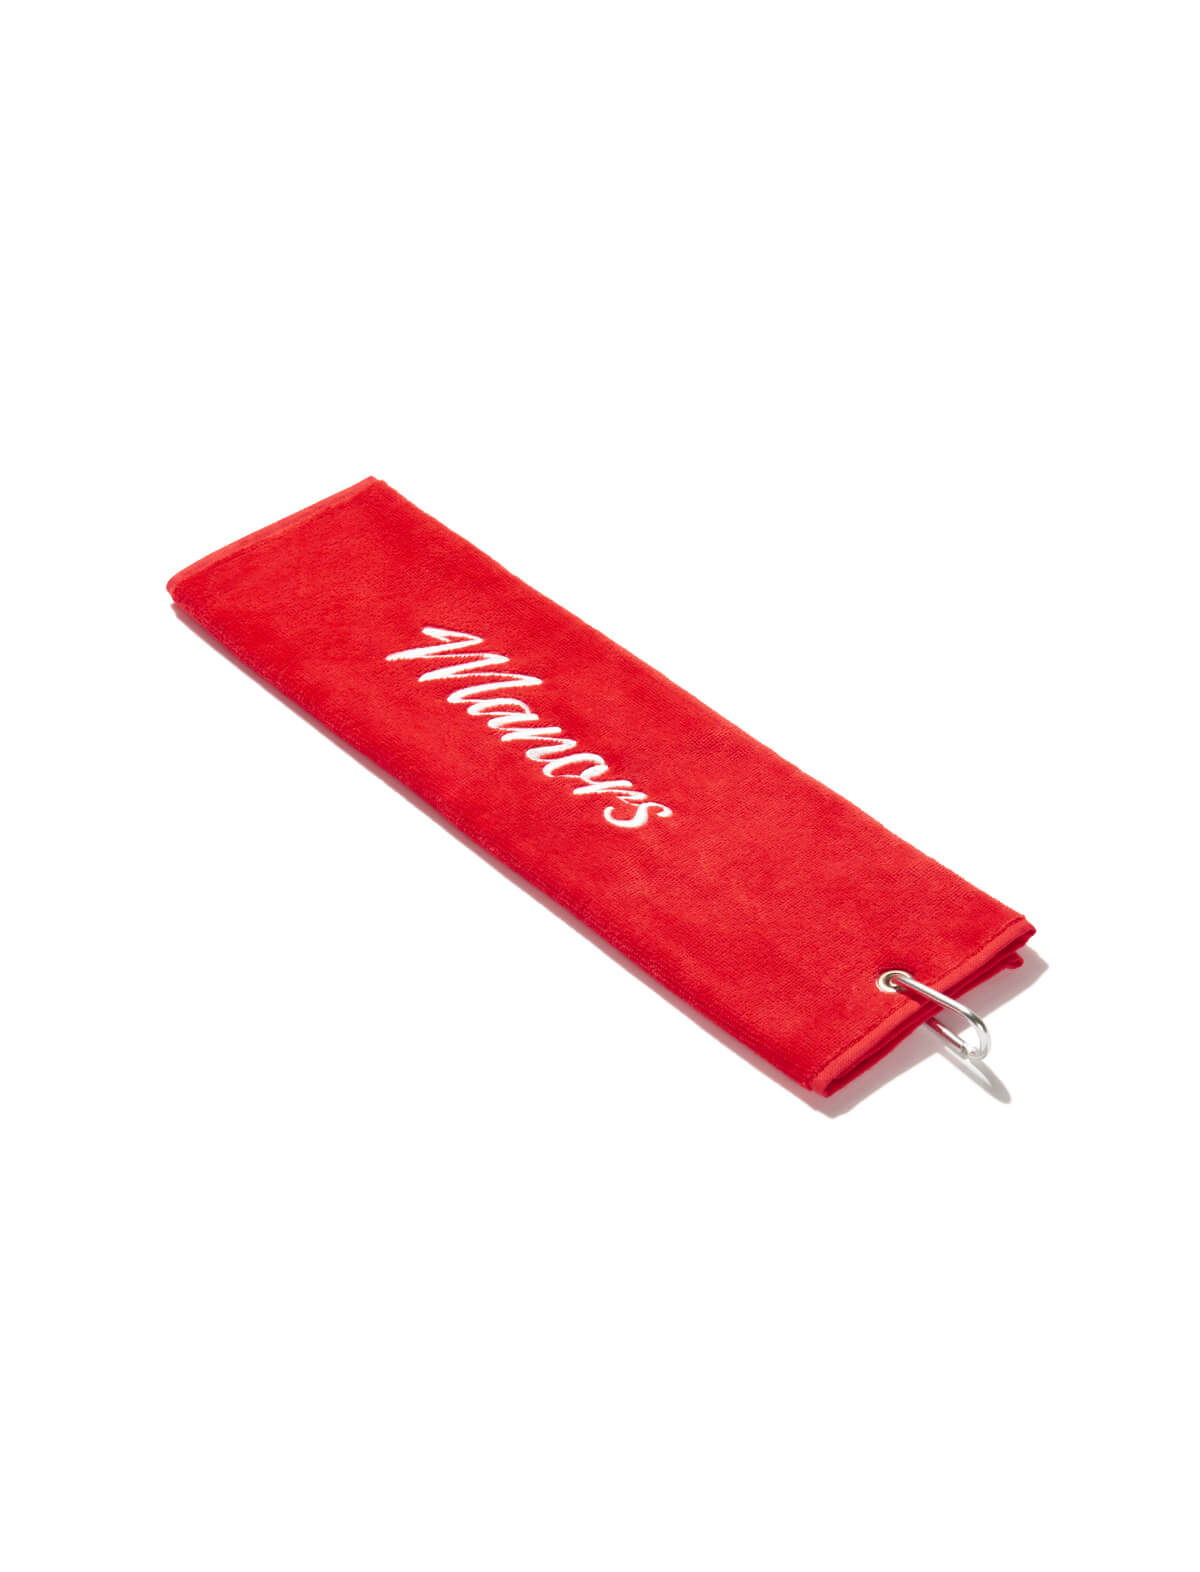 MANORS GOLF Manors Towel in Red